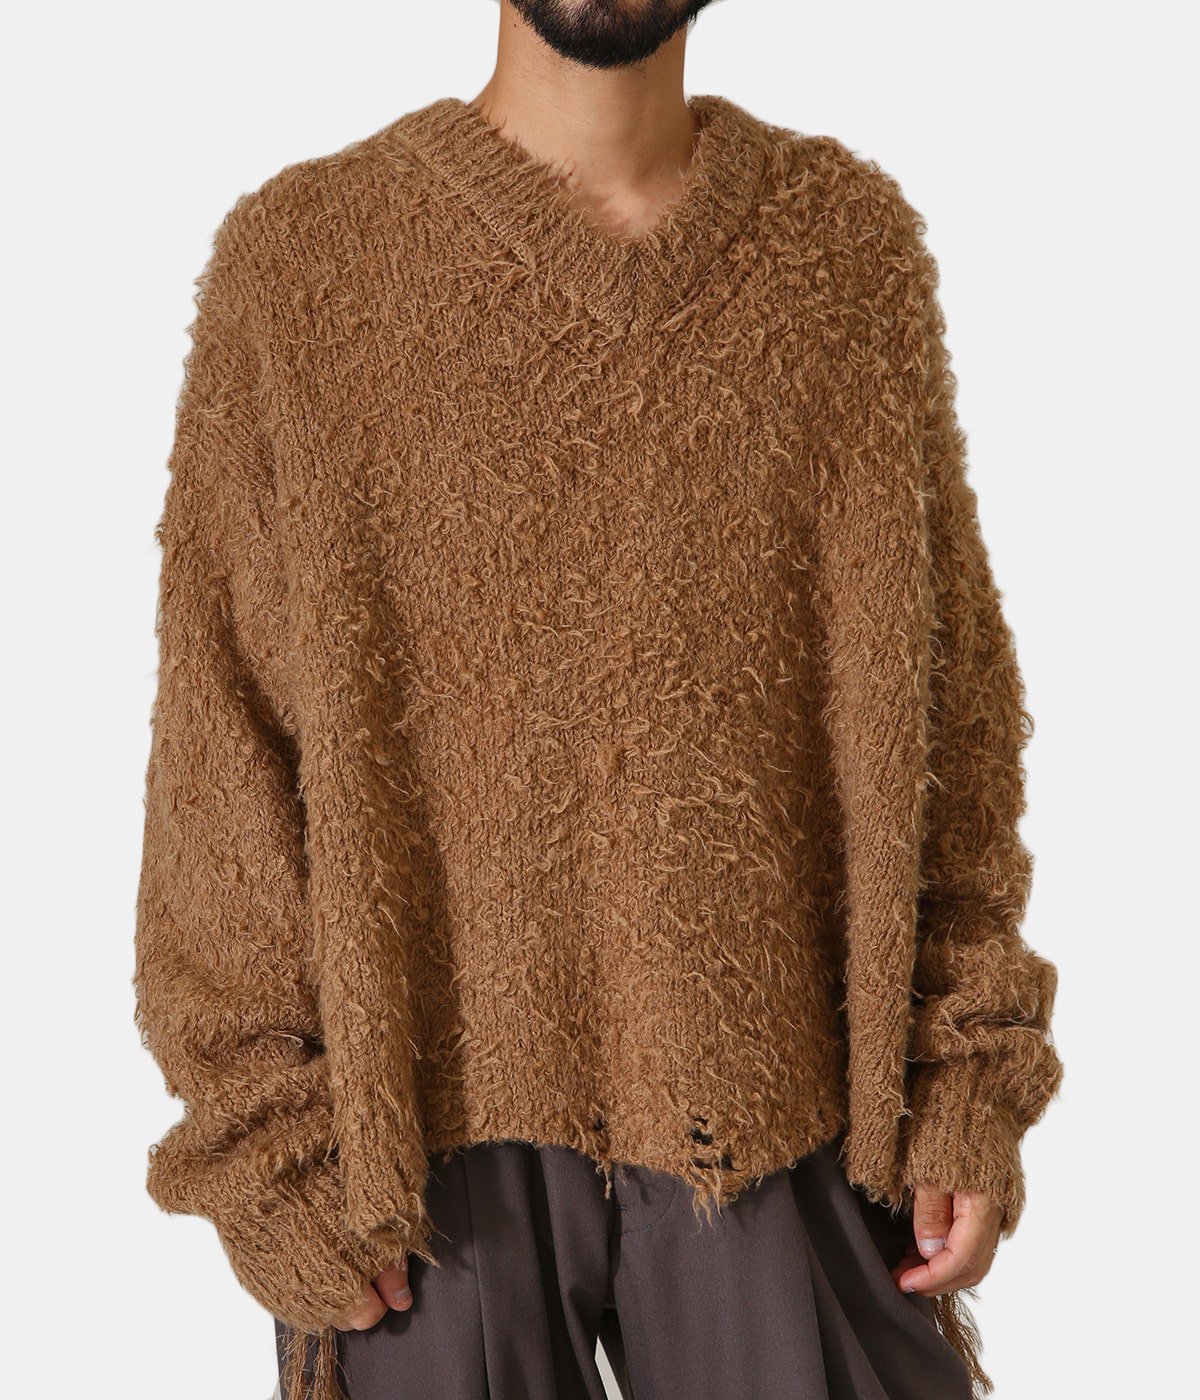 ANIMAL FUR CUT OFF PULLOVER | doublet(ダブレット) / トップス 